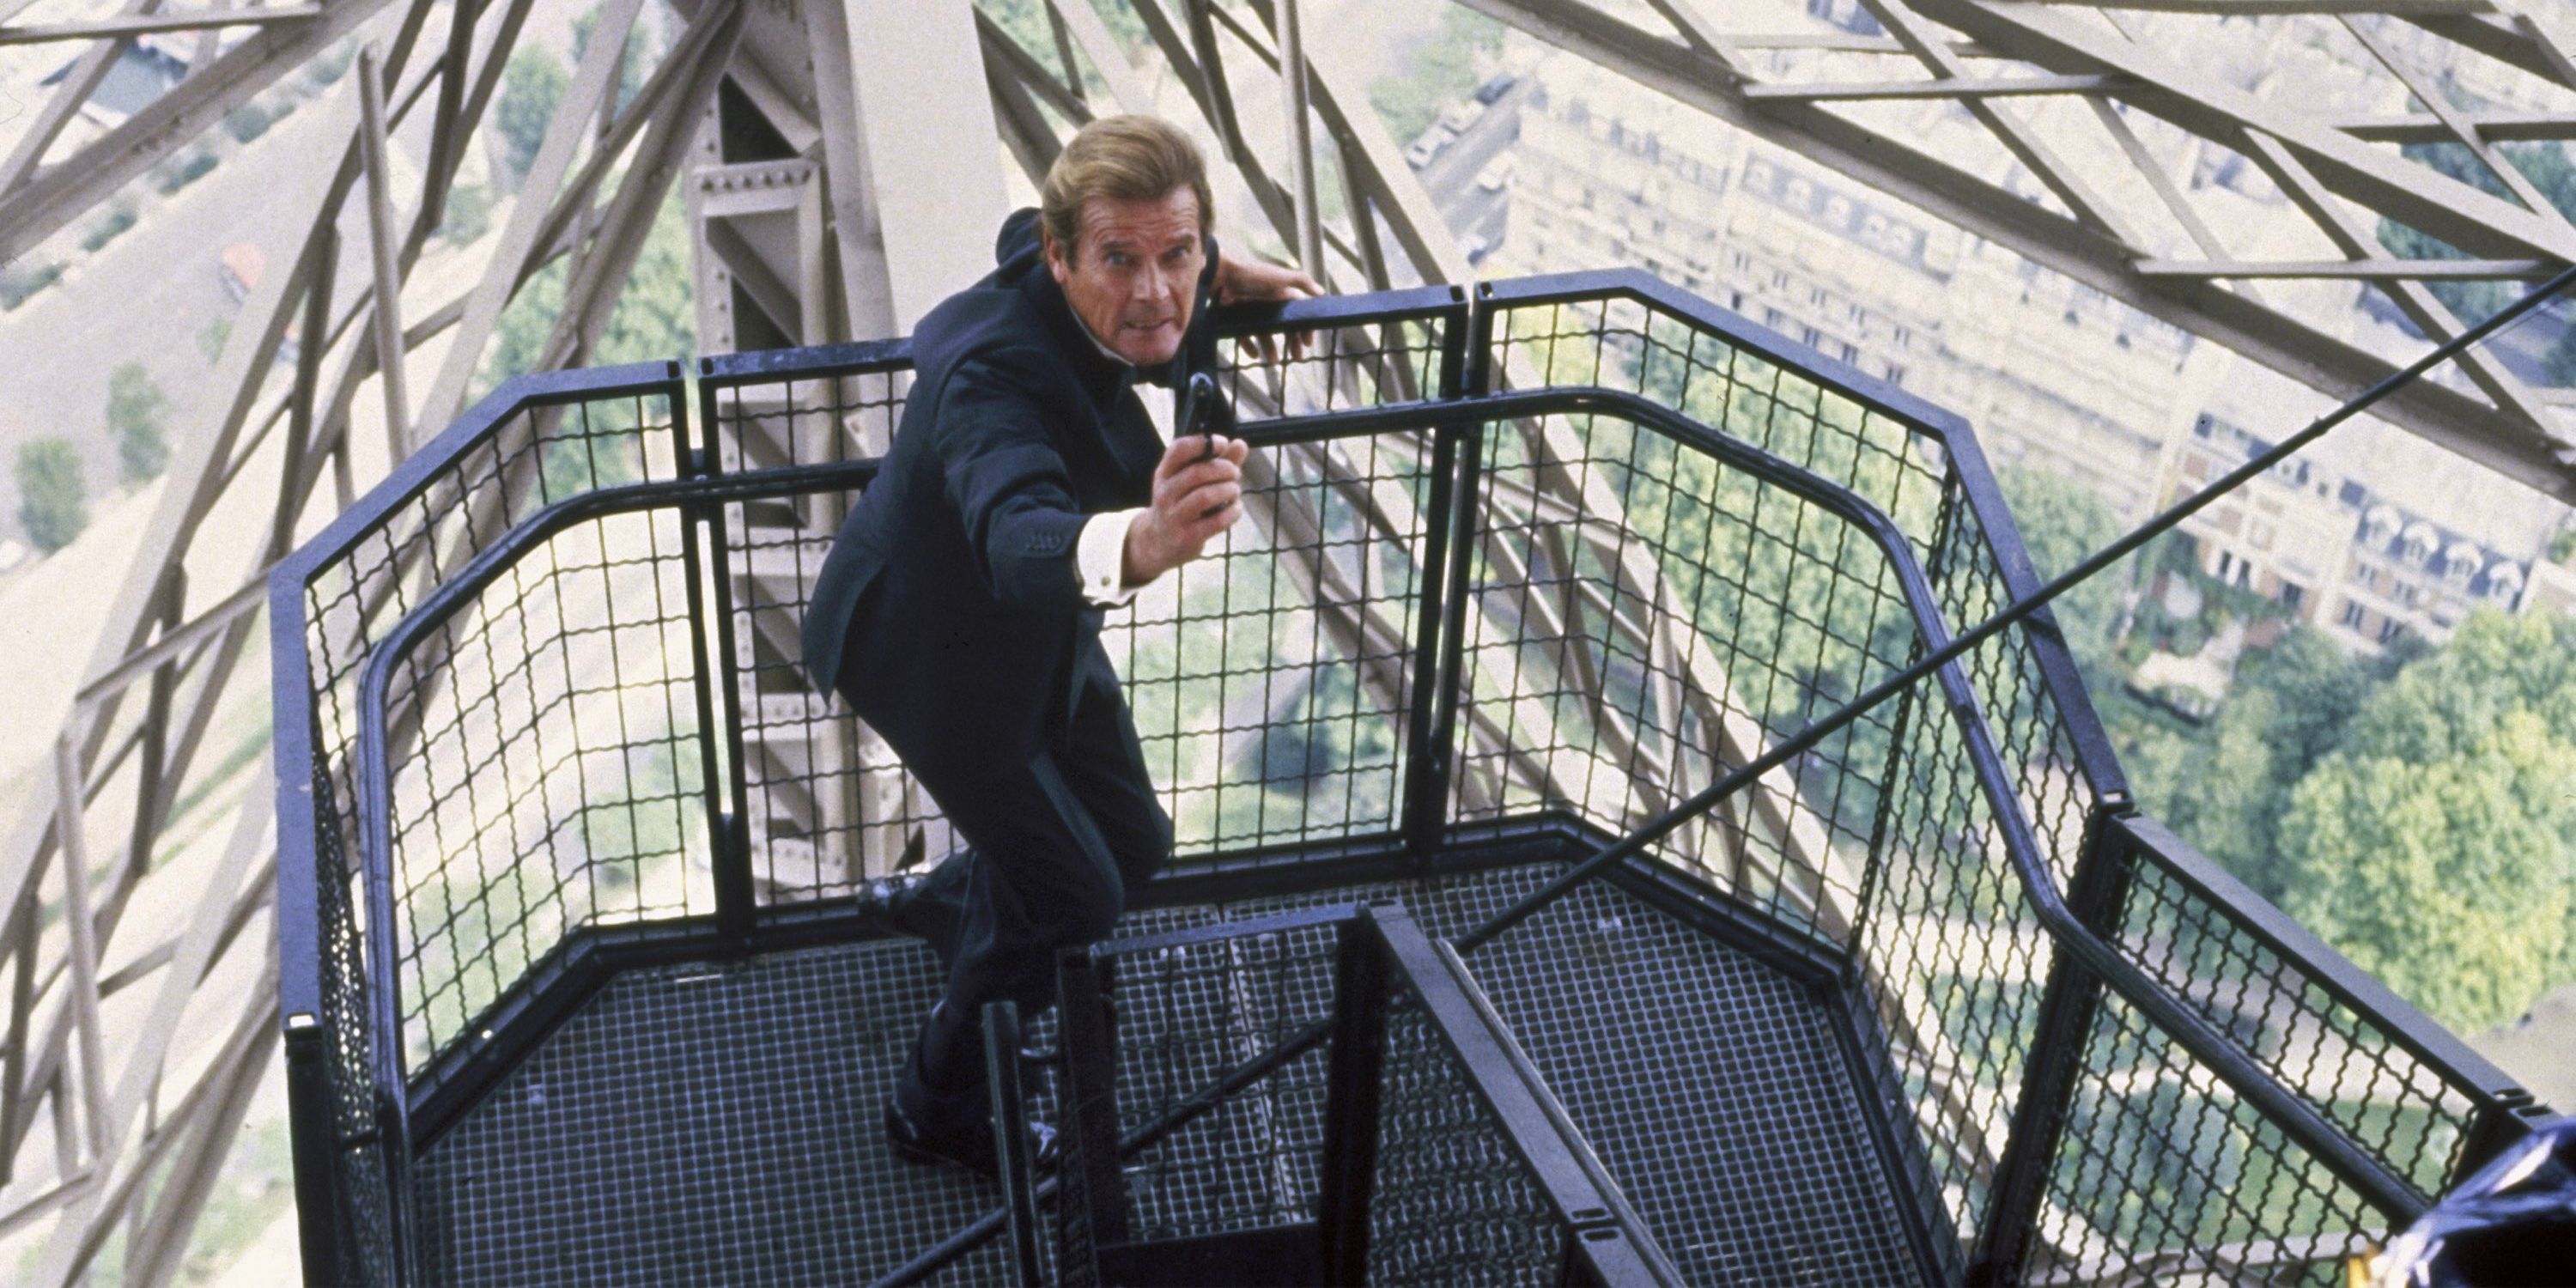 British Agent 007 aims his weapon as he climbs a perilously high flight of stairs.